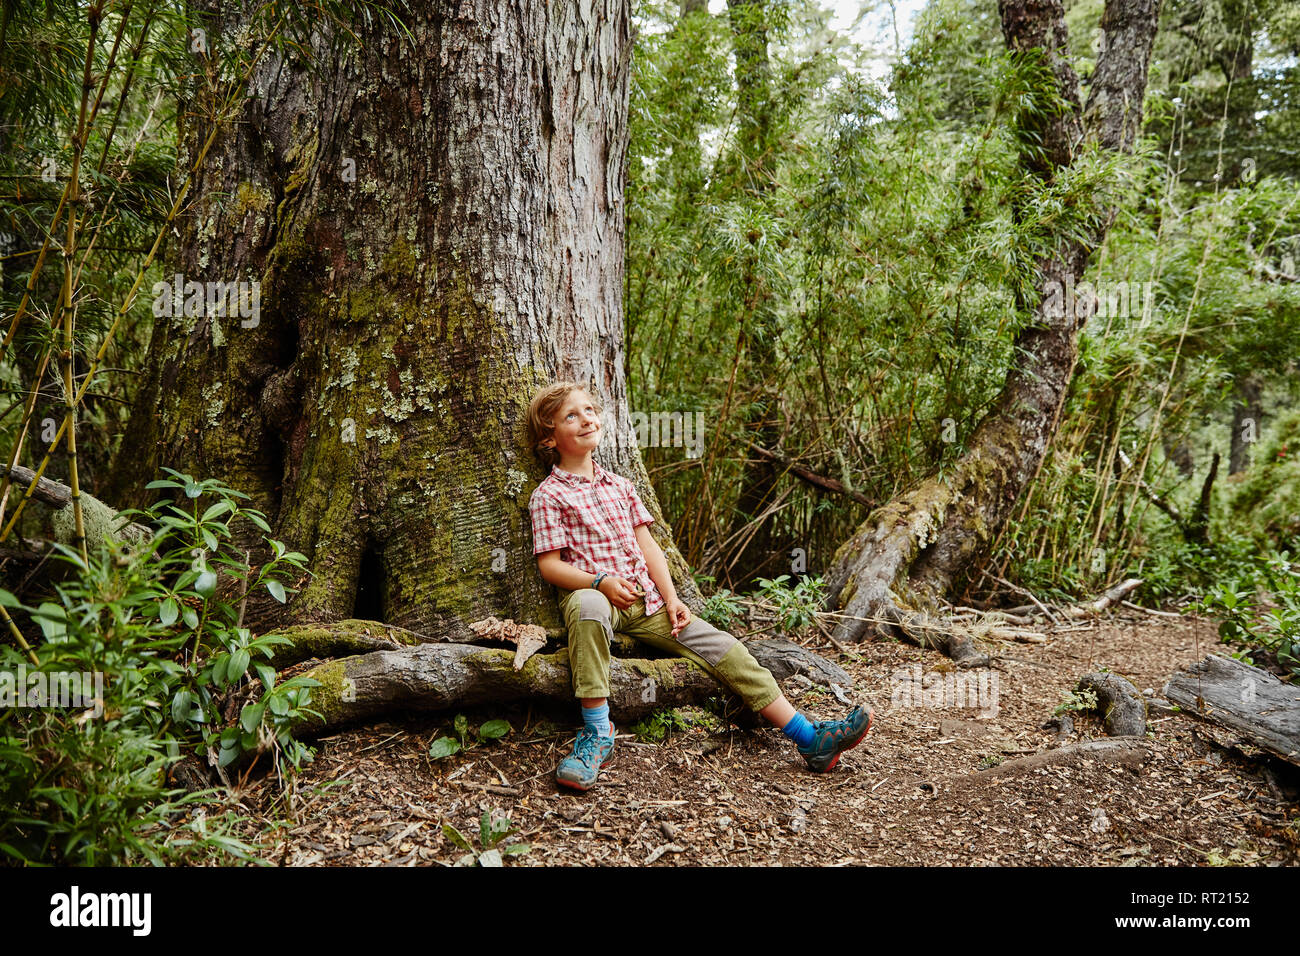 Chile, Puren, Nahuelbuta National Park, smiling boy sitting at a tree in forest looking up Stock Photo